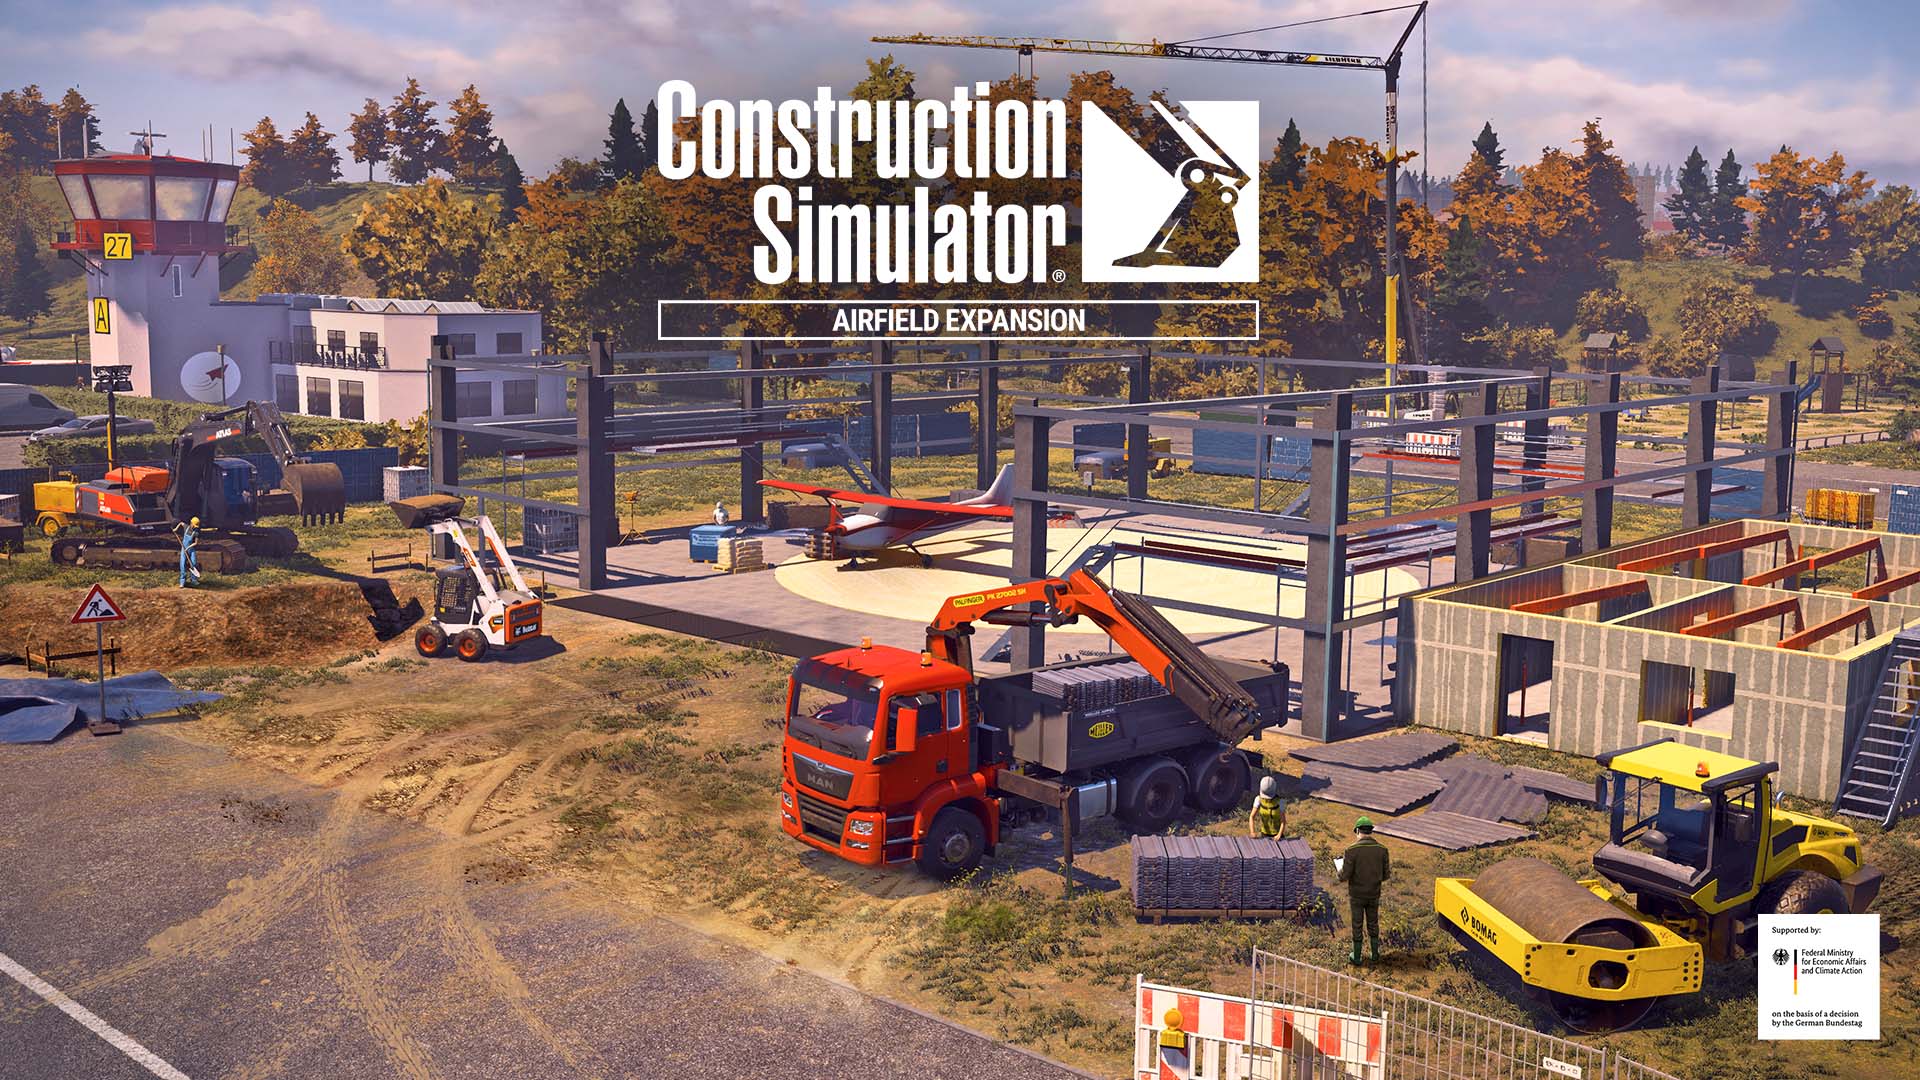 Construction Simulator - Airfield Expansion will be ready for take-off on  June 27, 2023!